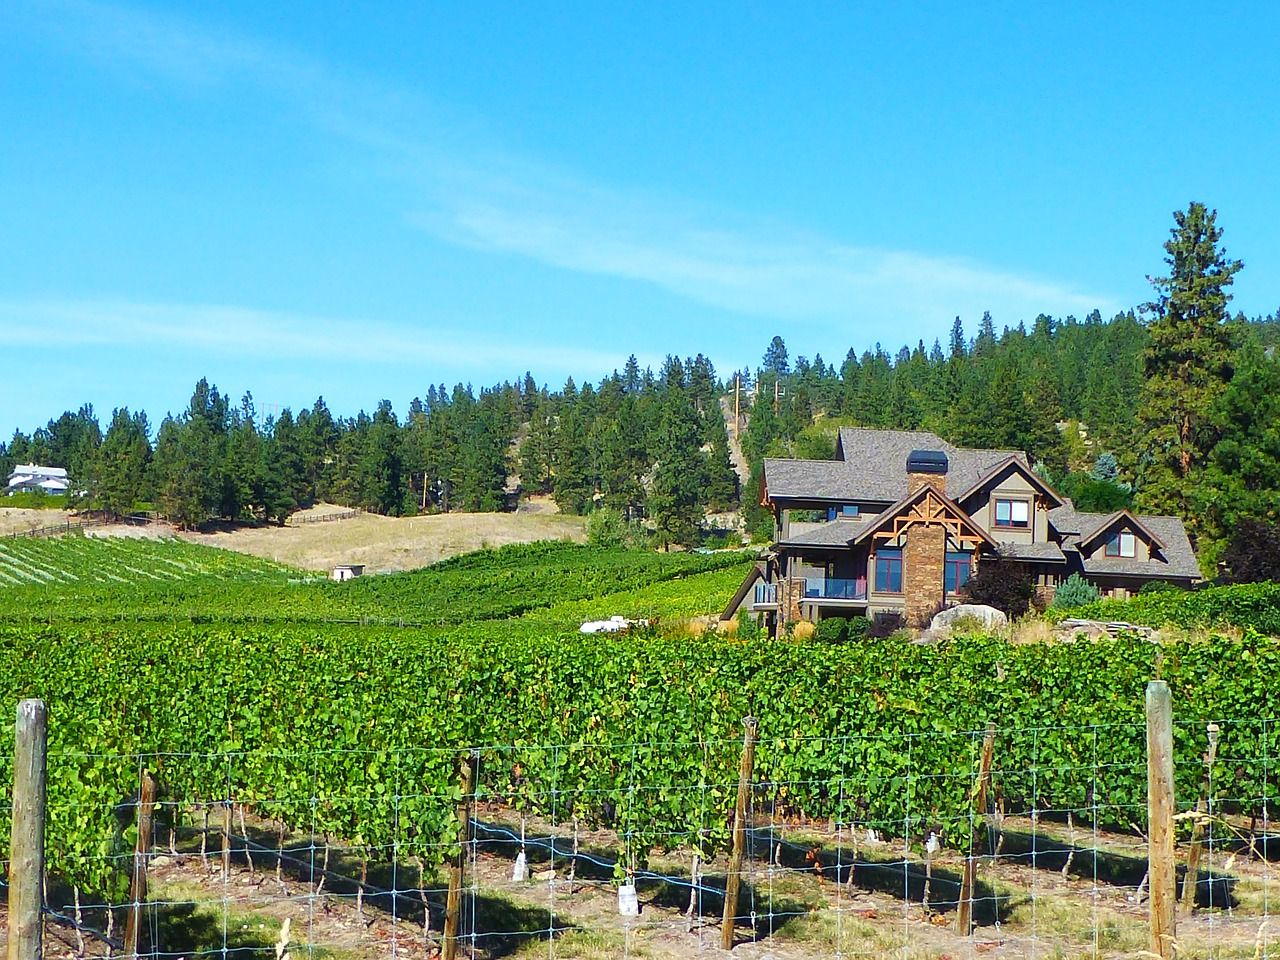 Okanagan wine tours on the Scenic Sip take guests past rolling vineyards in Lake Country.